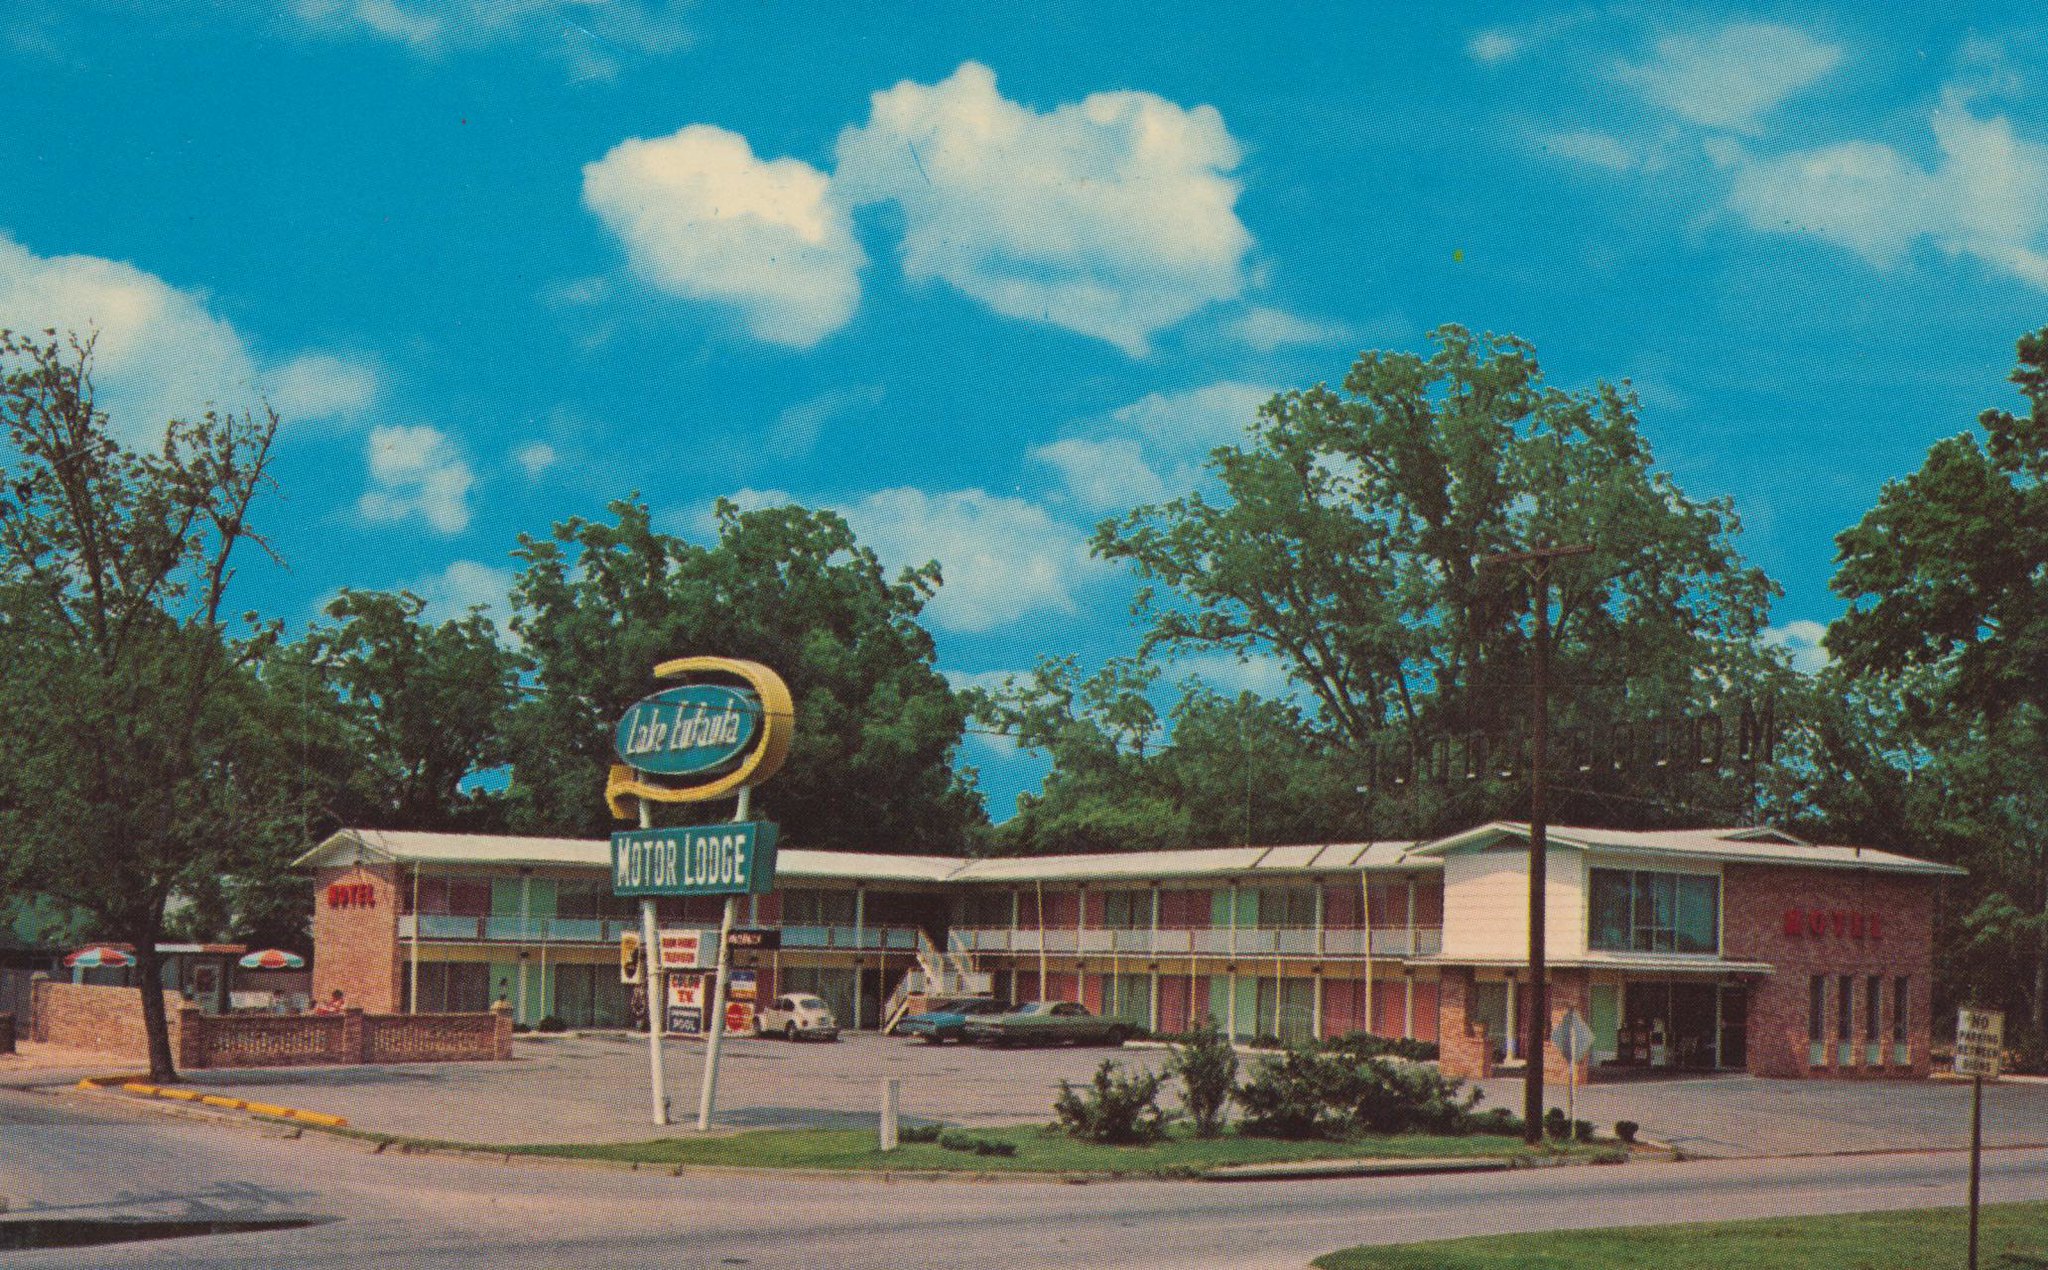 CITIES SERVICE GAS STATION & MORRAL'S MOTOR LODGE-BREEZEWOOD,PA 